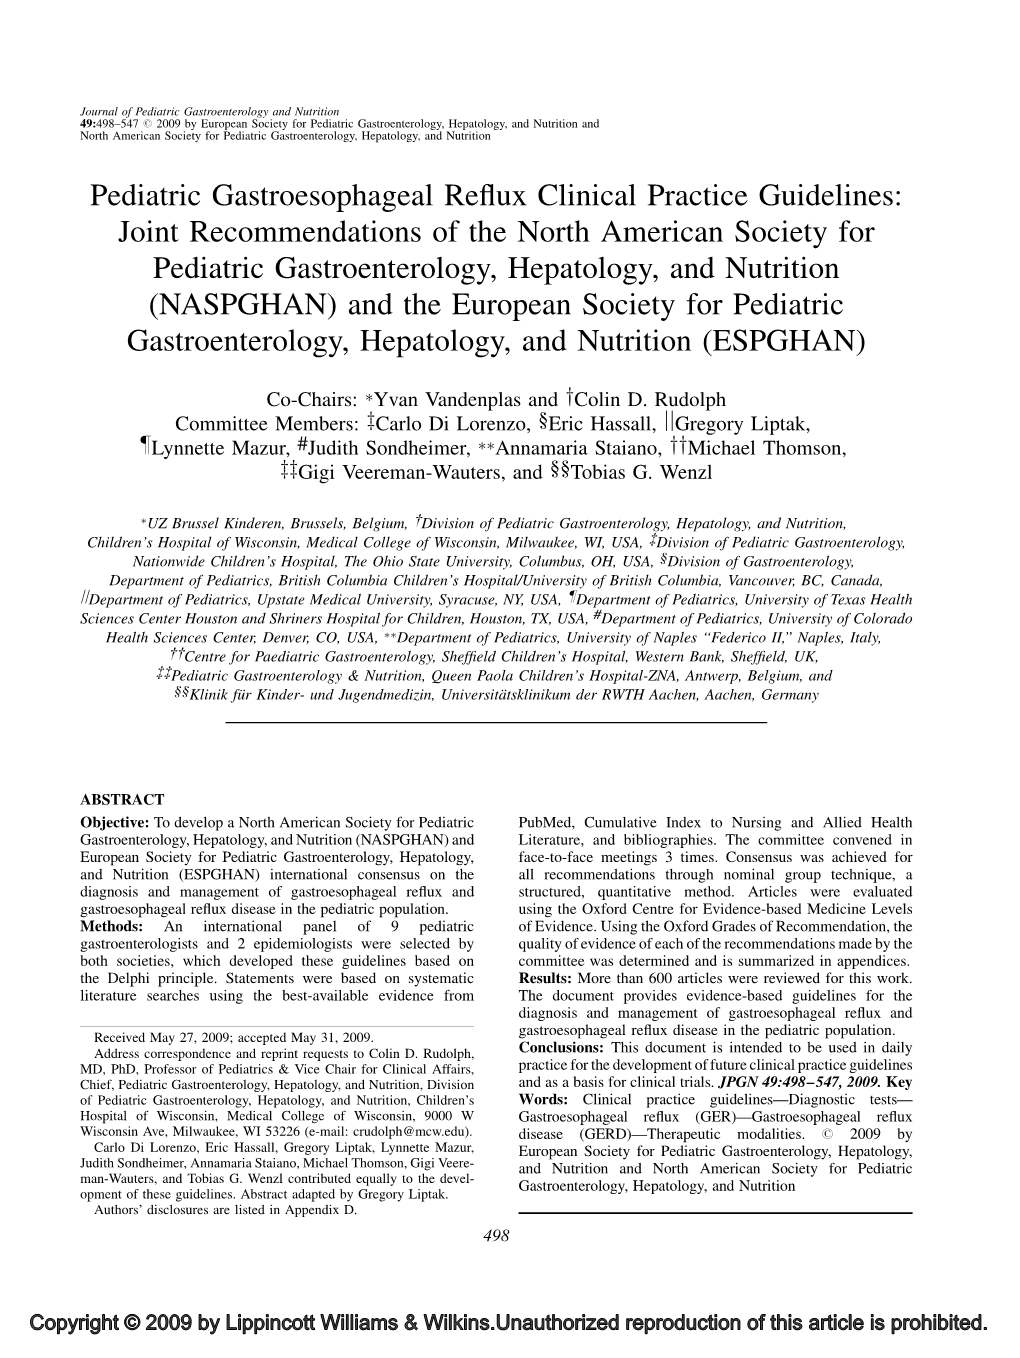 Pediatric Gastroesophageal Reflux Clinical Practice Guidelines 499